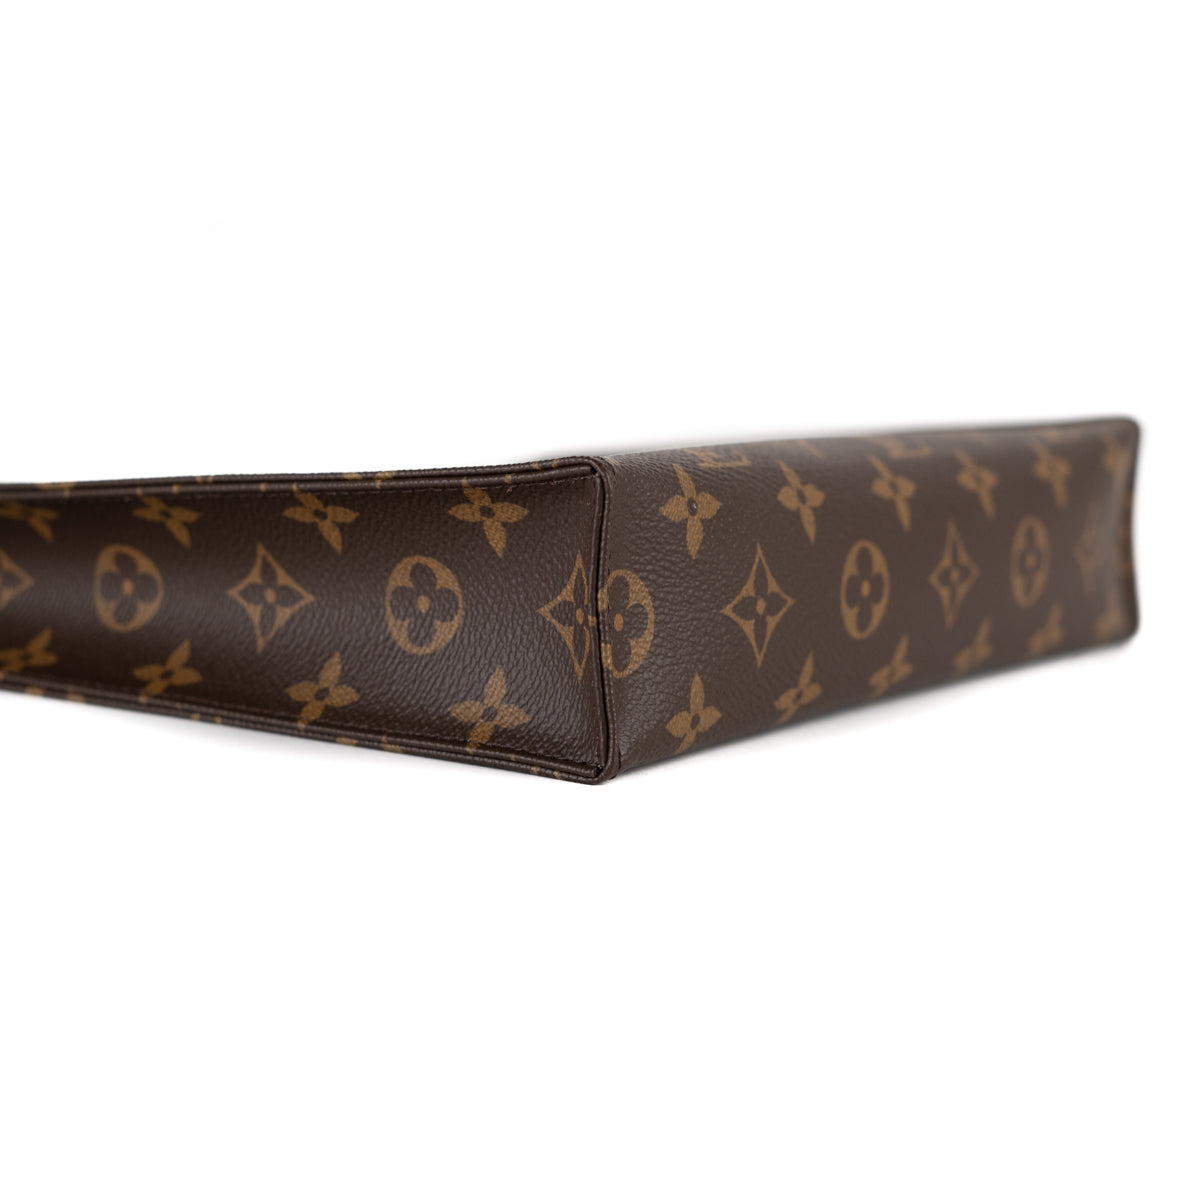 NEWS: Louis Vuitton Brings Back the Toiletry Pouch… with a Twist